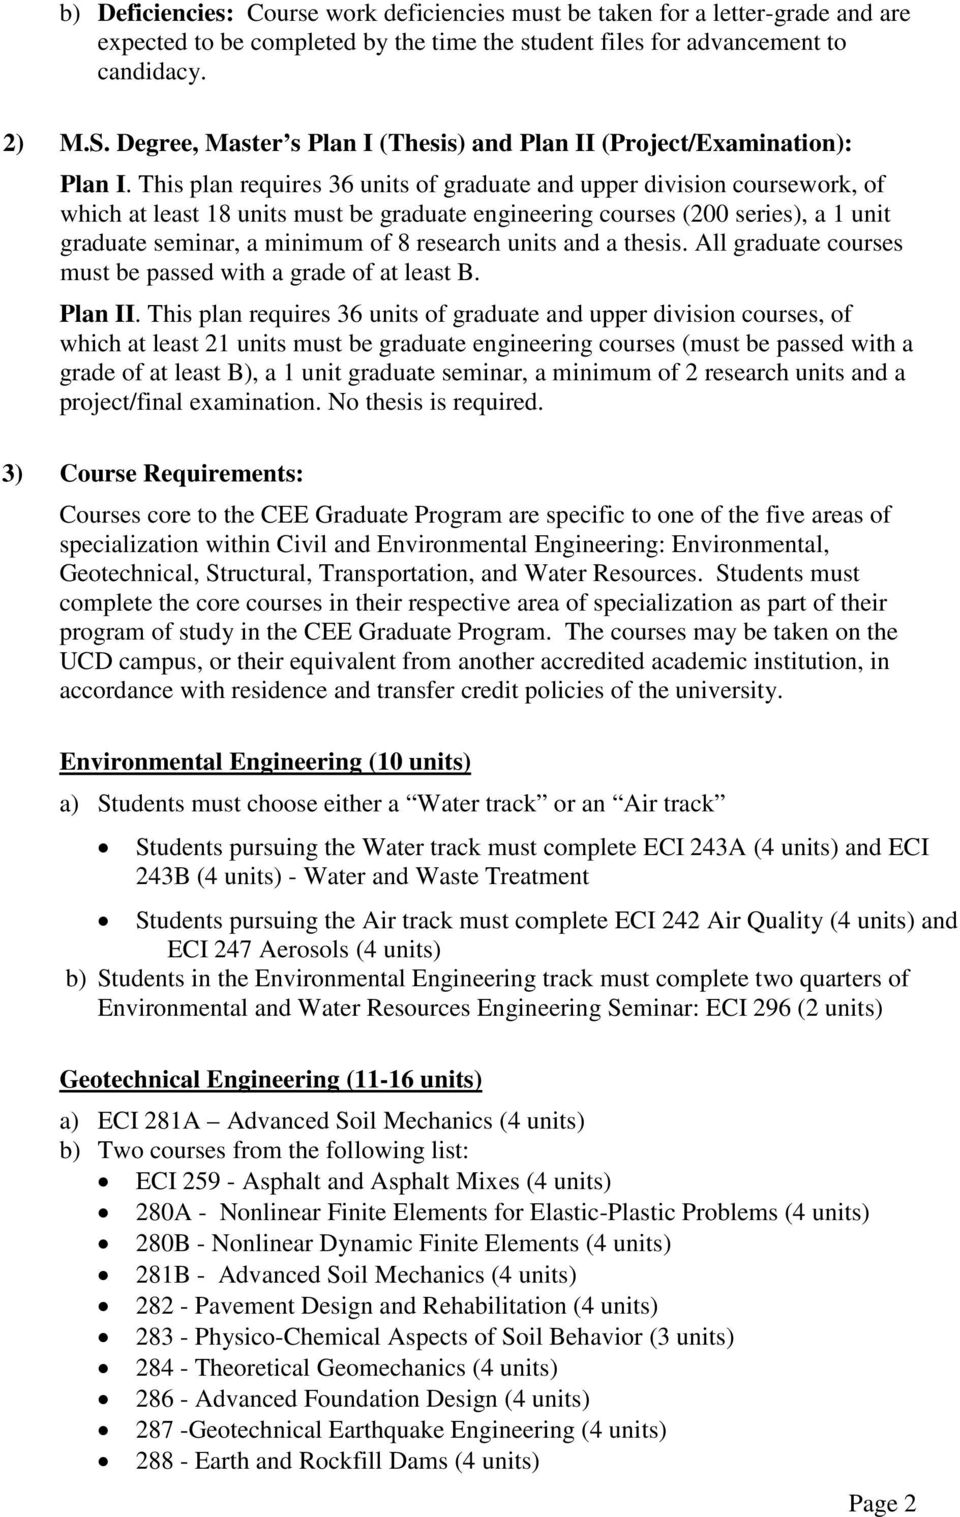 This plan requires 36 units of graduate and upper division coursework, of which at least 18 units must be graduate engineering courses (200 series), a 1 unit graduate seminar, a minimum of 8 research